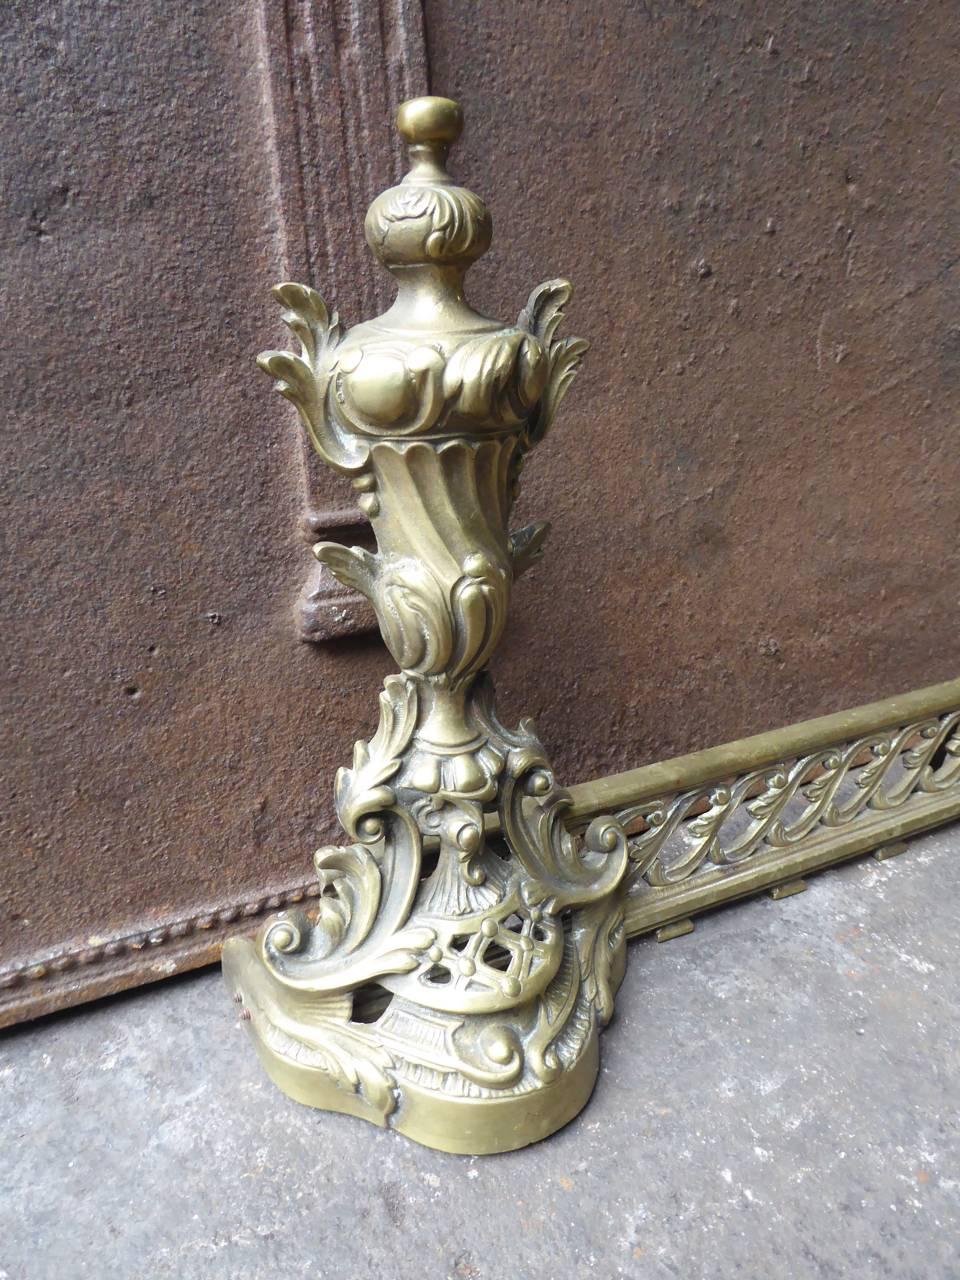 19th century French Neoclassical fireplace fender made of brass.

We have a unique and specialized collection of antique and used fireplace accessories consisting of more than 1000 listings at 1stdibs. Amongst others, we always have 300+ firebacks,